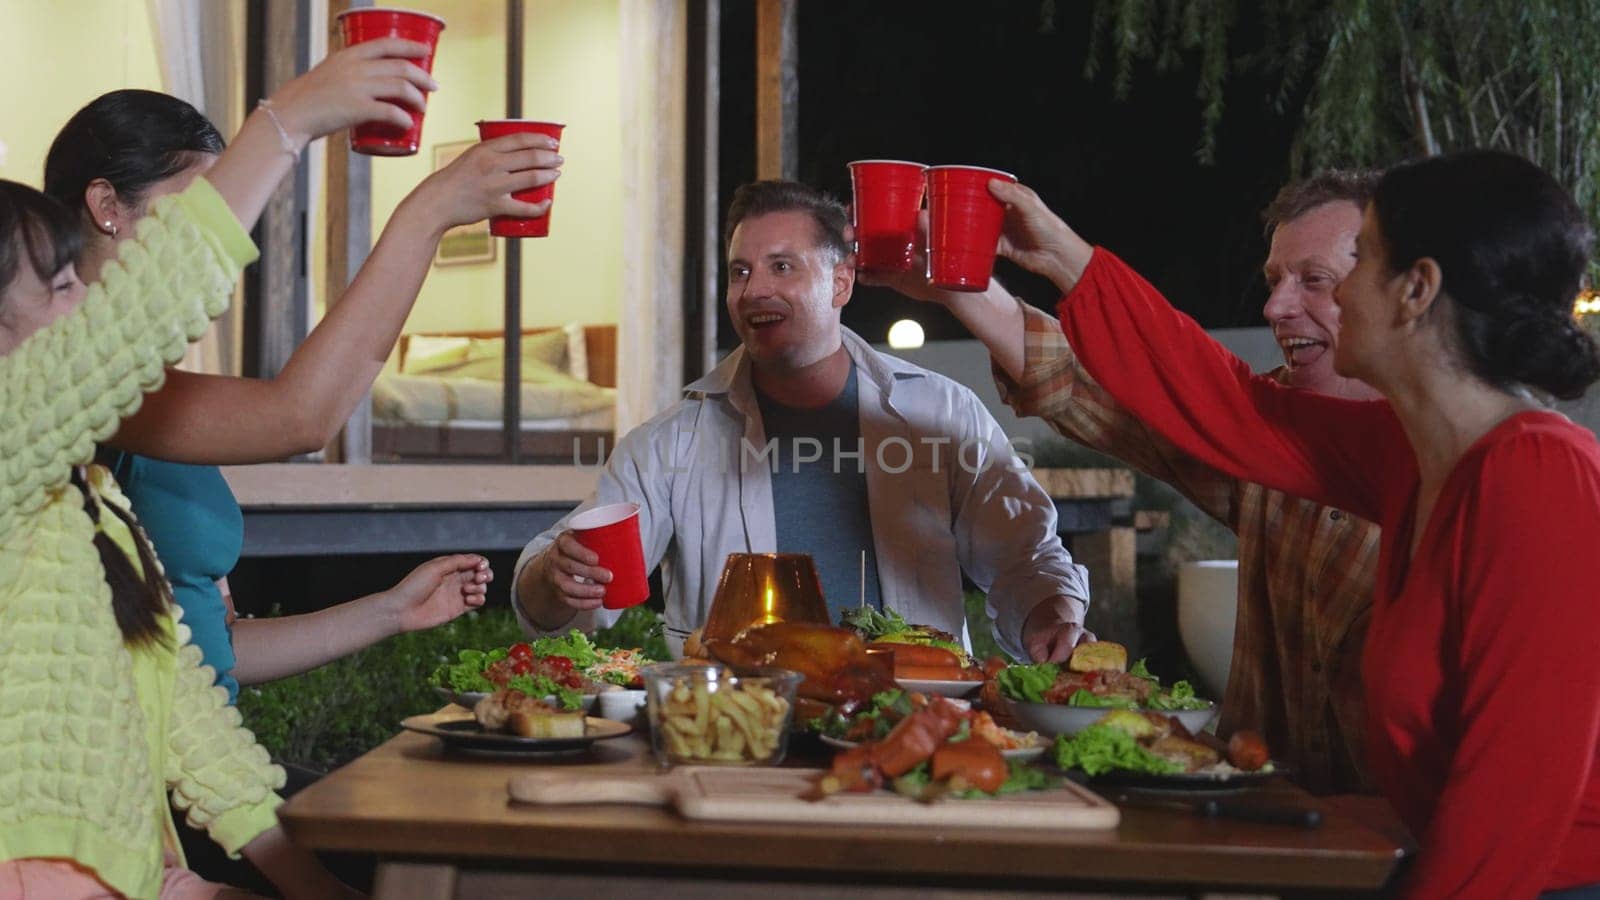 Family together celebrate holiday in garden. Grandparents, parents and daughter use beverage glass cheers for celebration. Outdoor camping activity relax with meal strengthen family bond. Divergence.